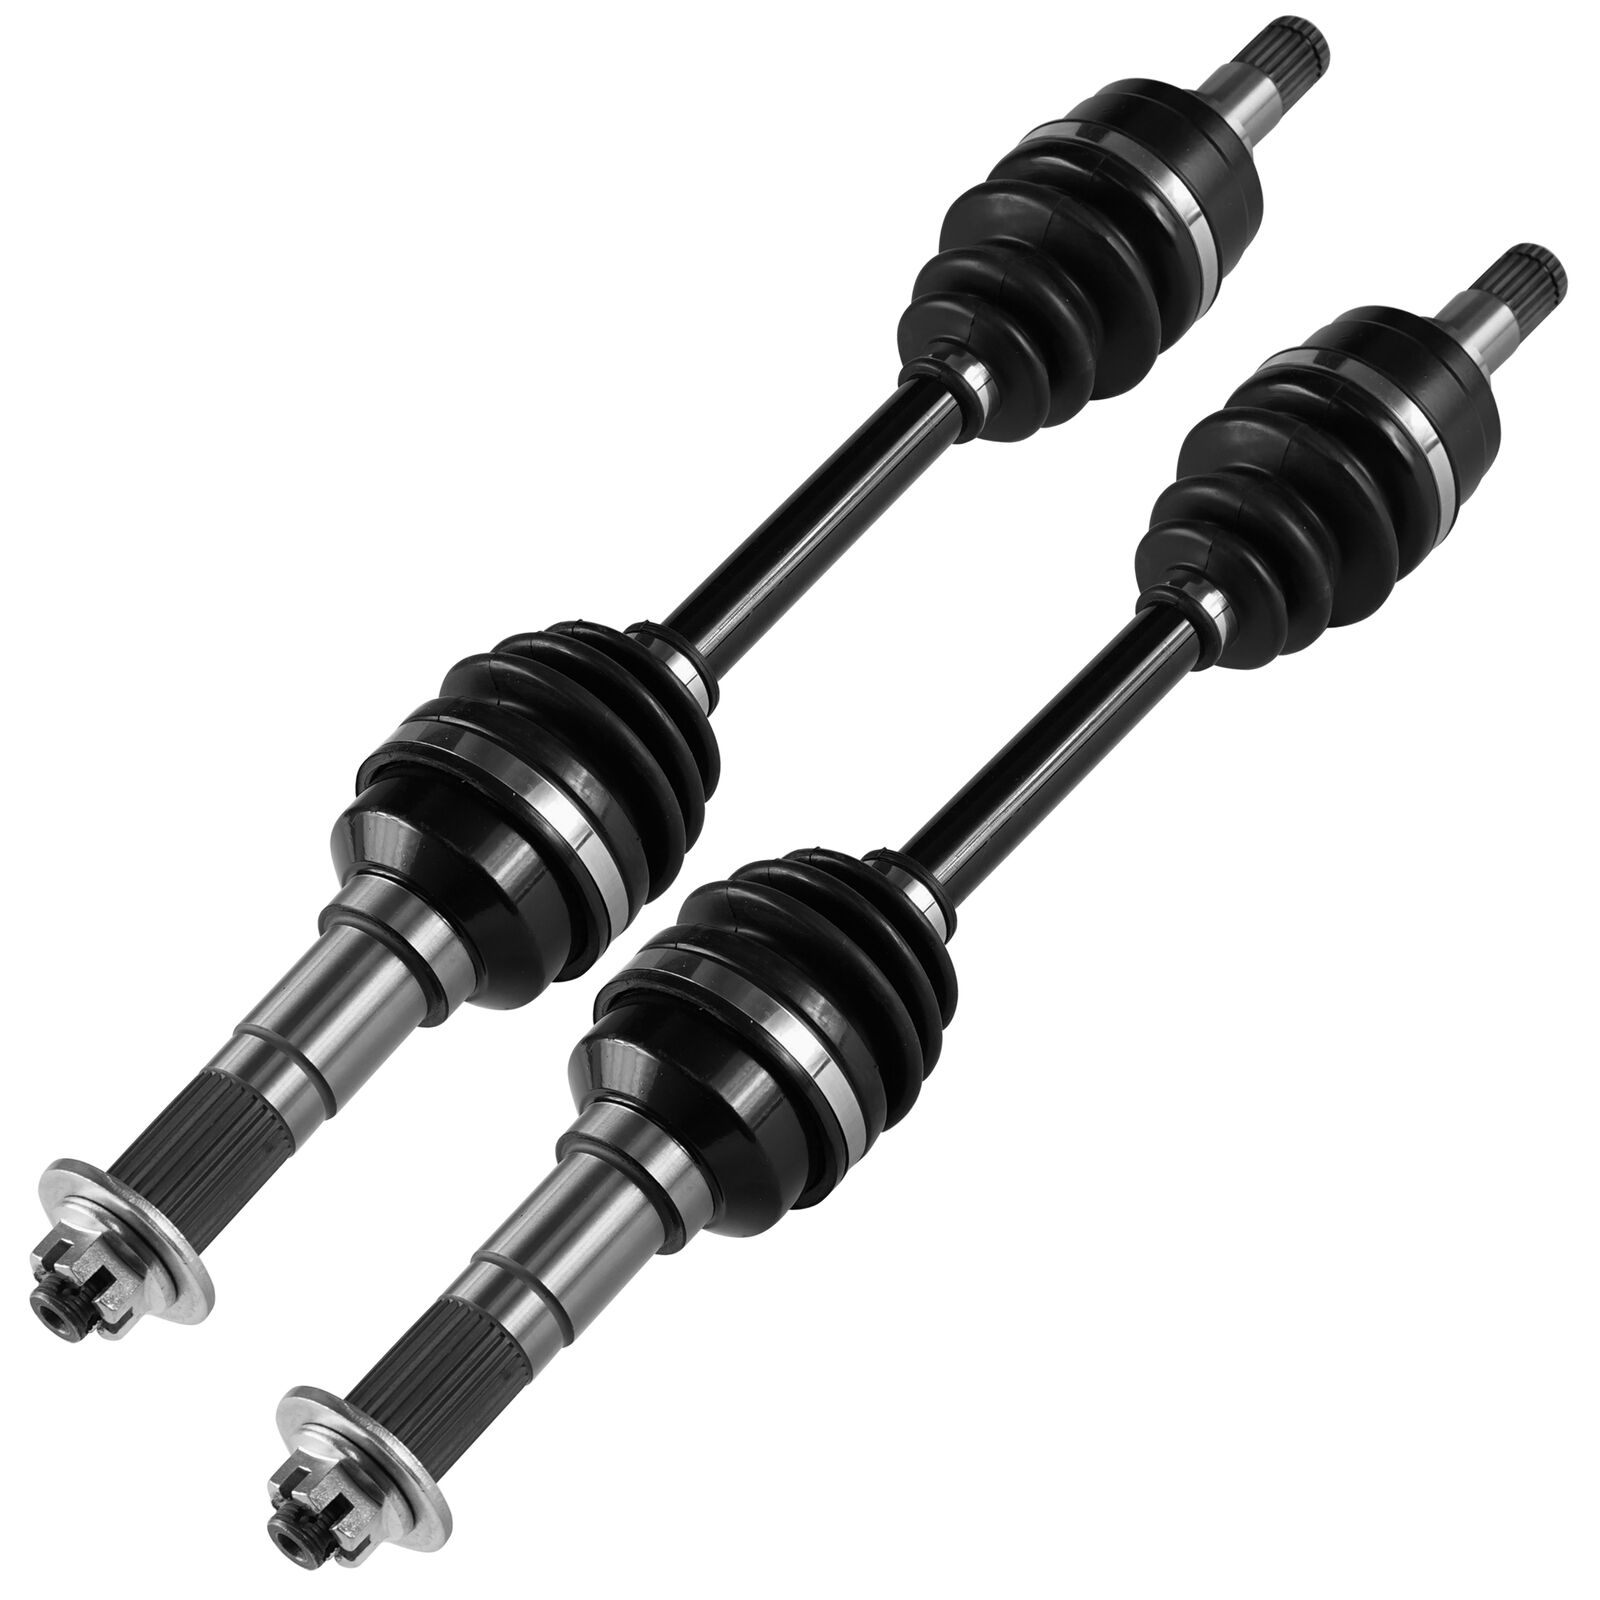 Front Left And Right CV Joint Axles for Yamaha Kodiak 400 YFM400FW 4WD 1993-98